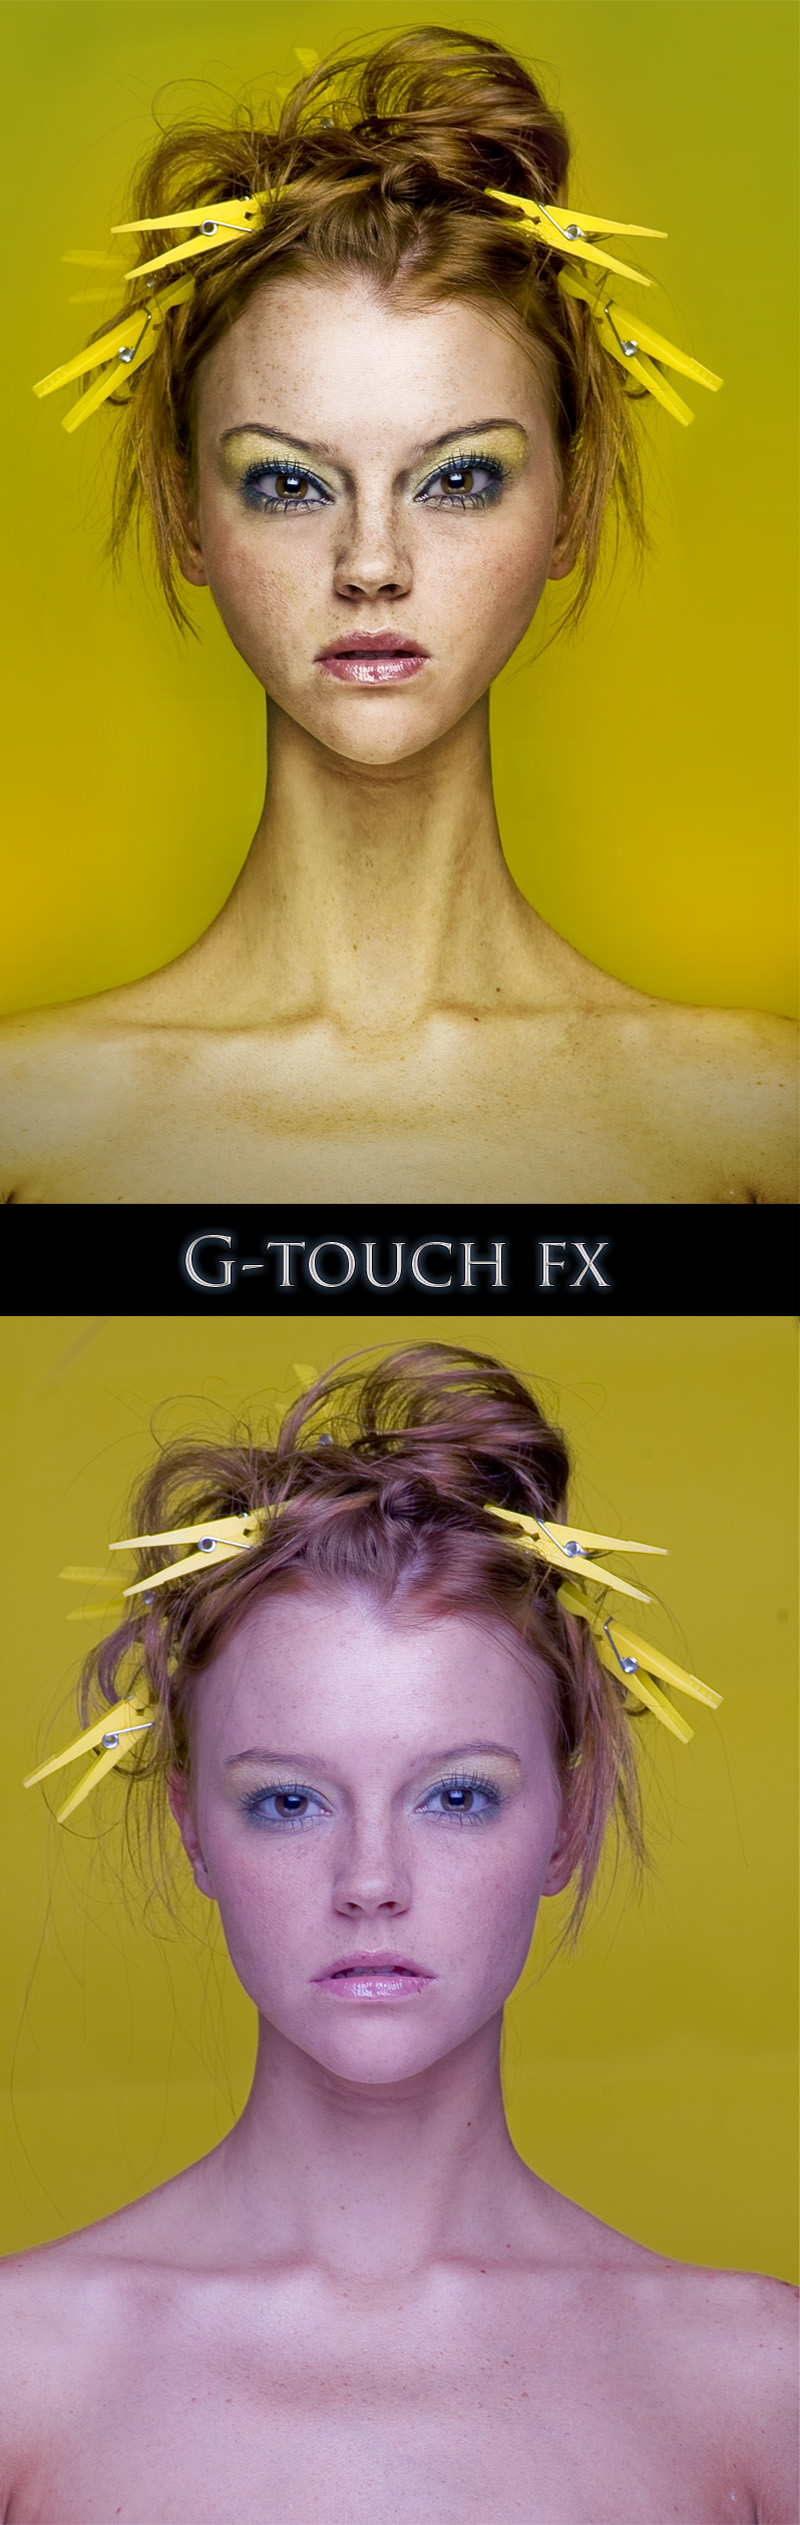 Male model photo shoot of G-Touch Fx by Kelly Sedivec-Ealy